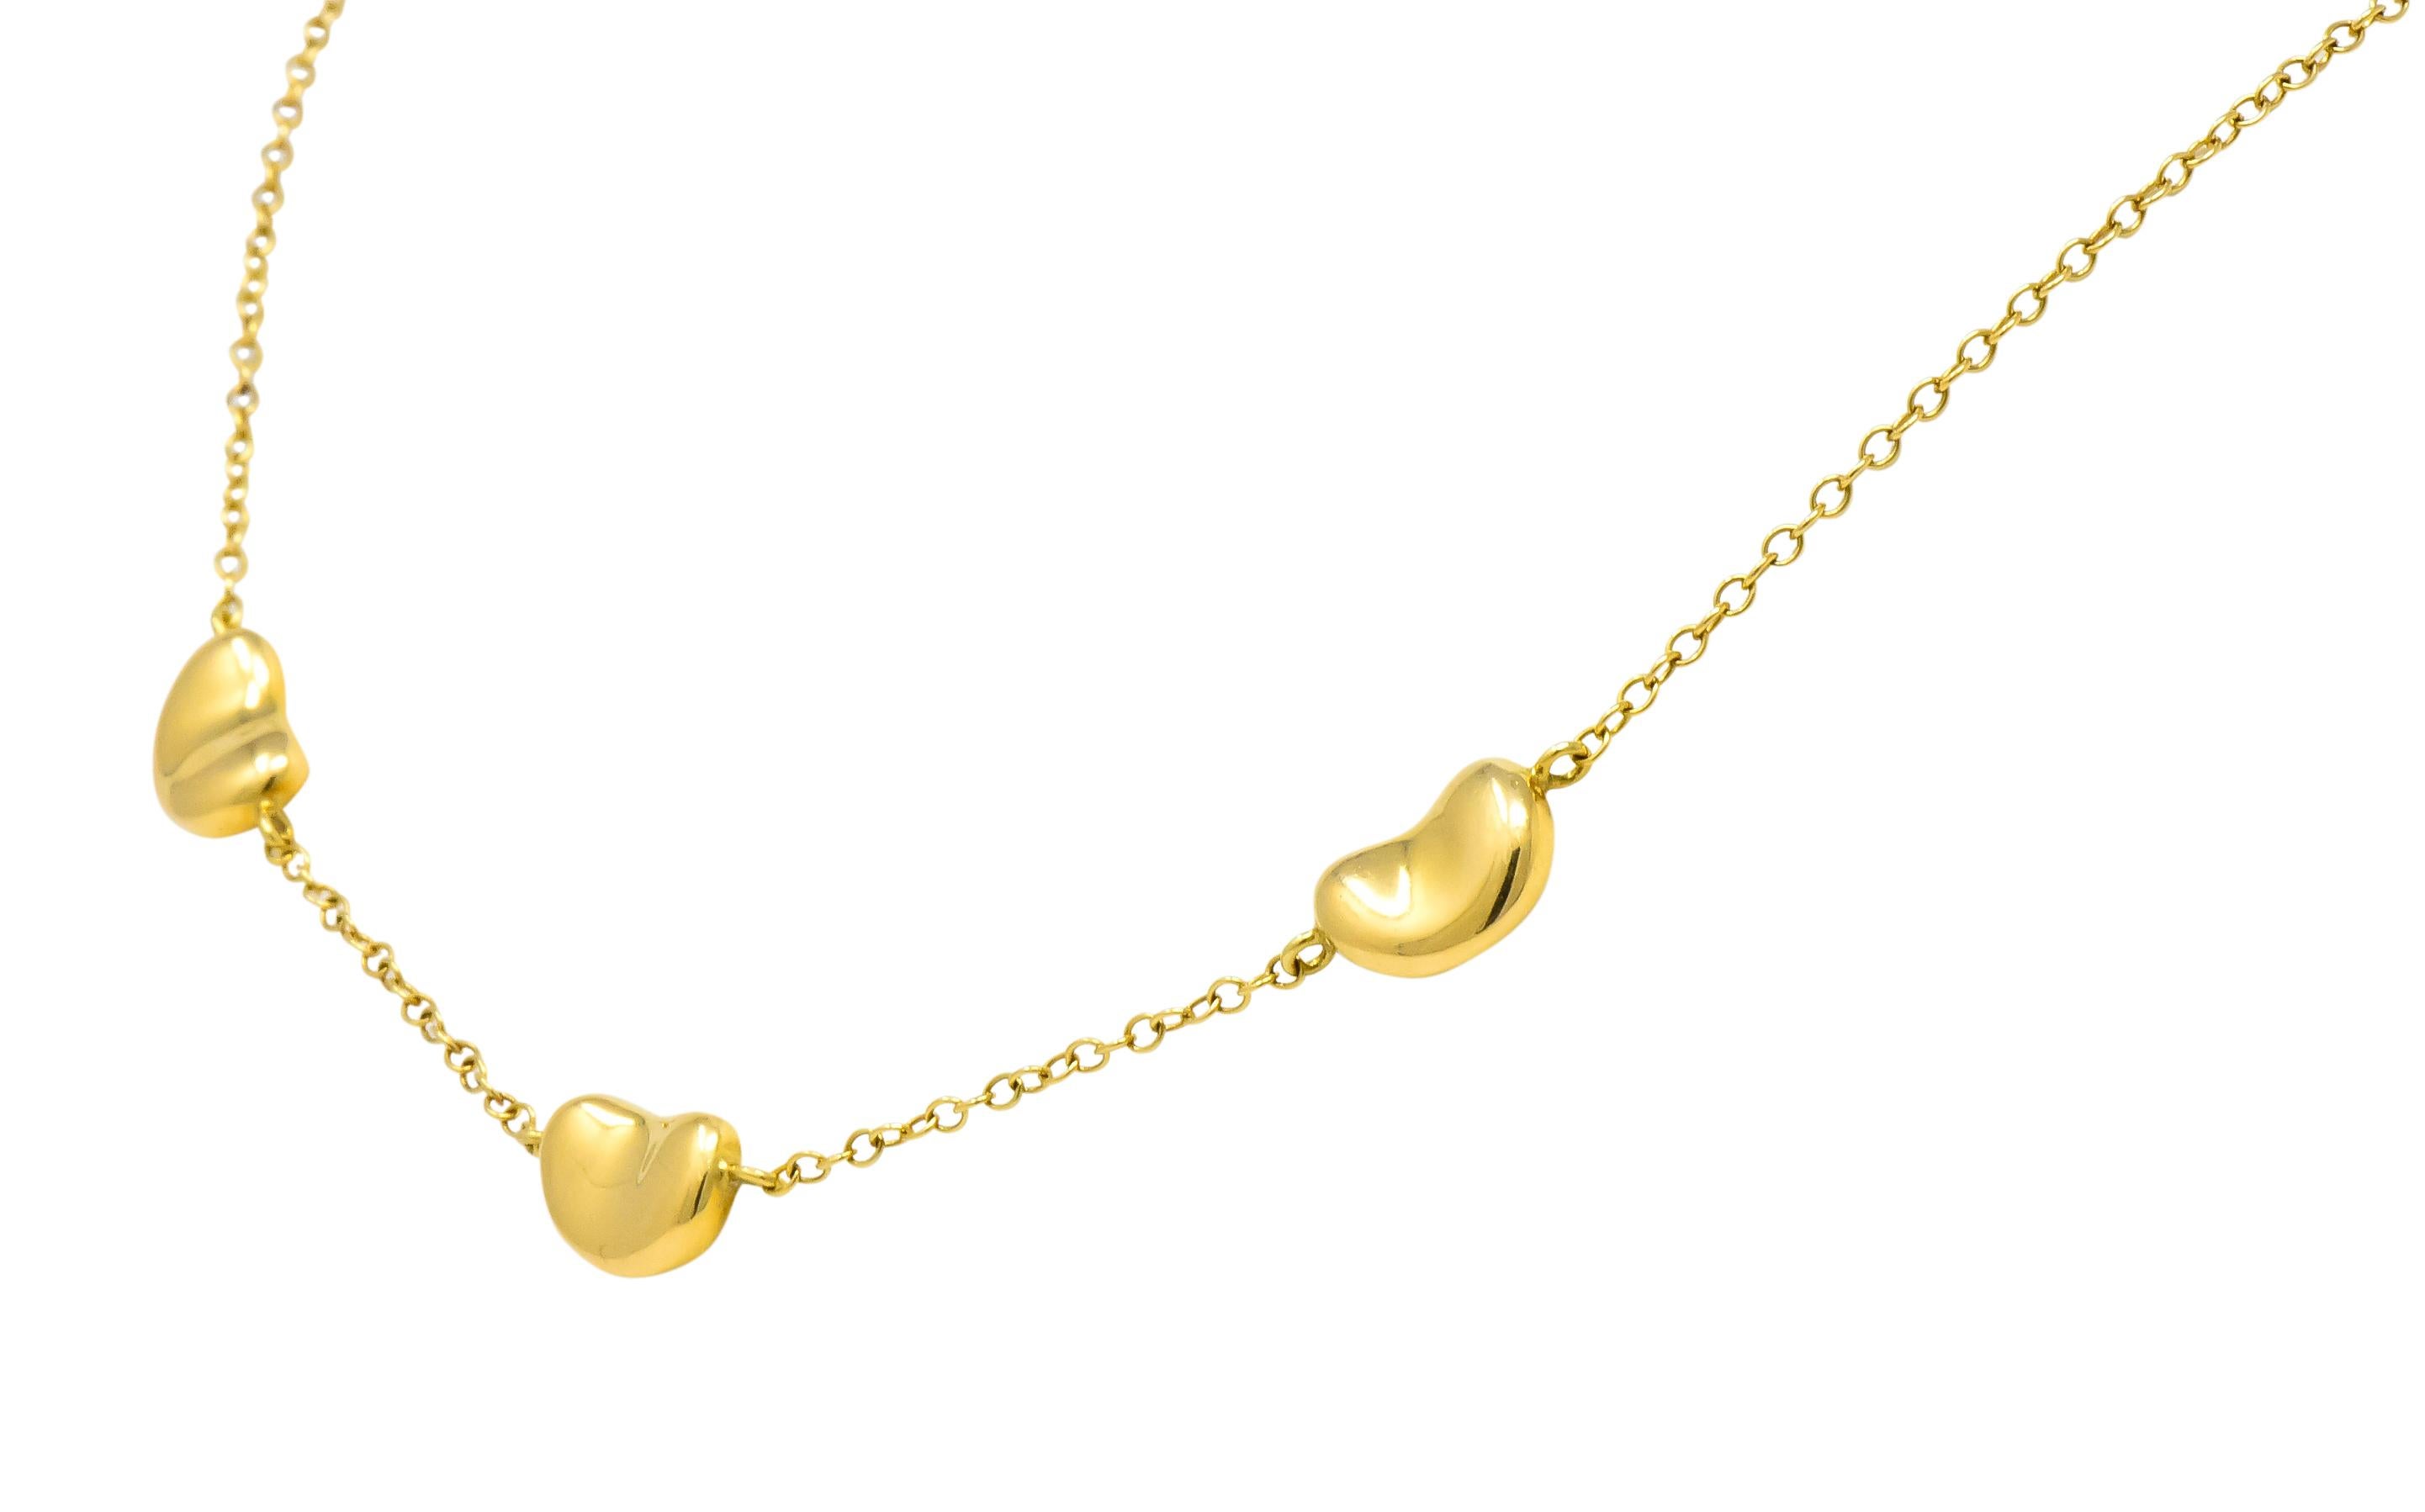 Set to the front with three high polished gold 'beans' measuring approximately 10.5 x 7.5 mm

Connected and completed by cable style chain with spring ring clasp

From her Bean Design collection

Fully signed Tiffany & Co., Elsa Peretti and stamped